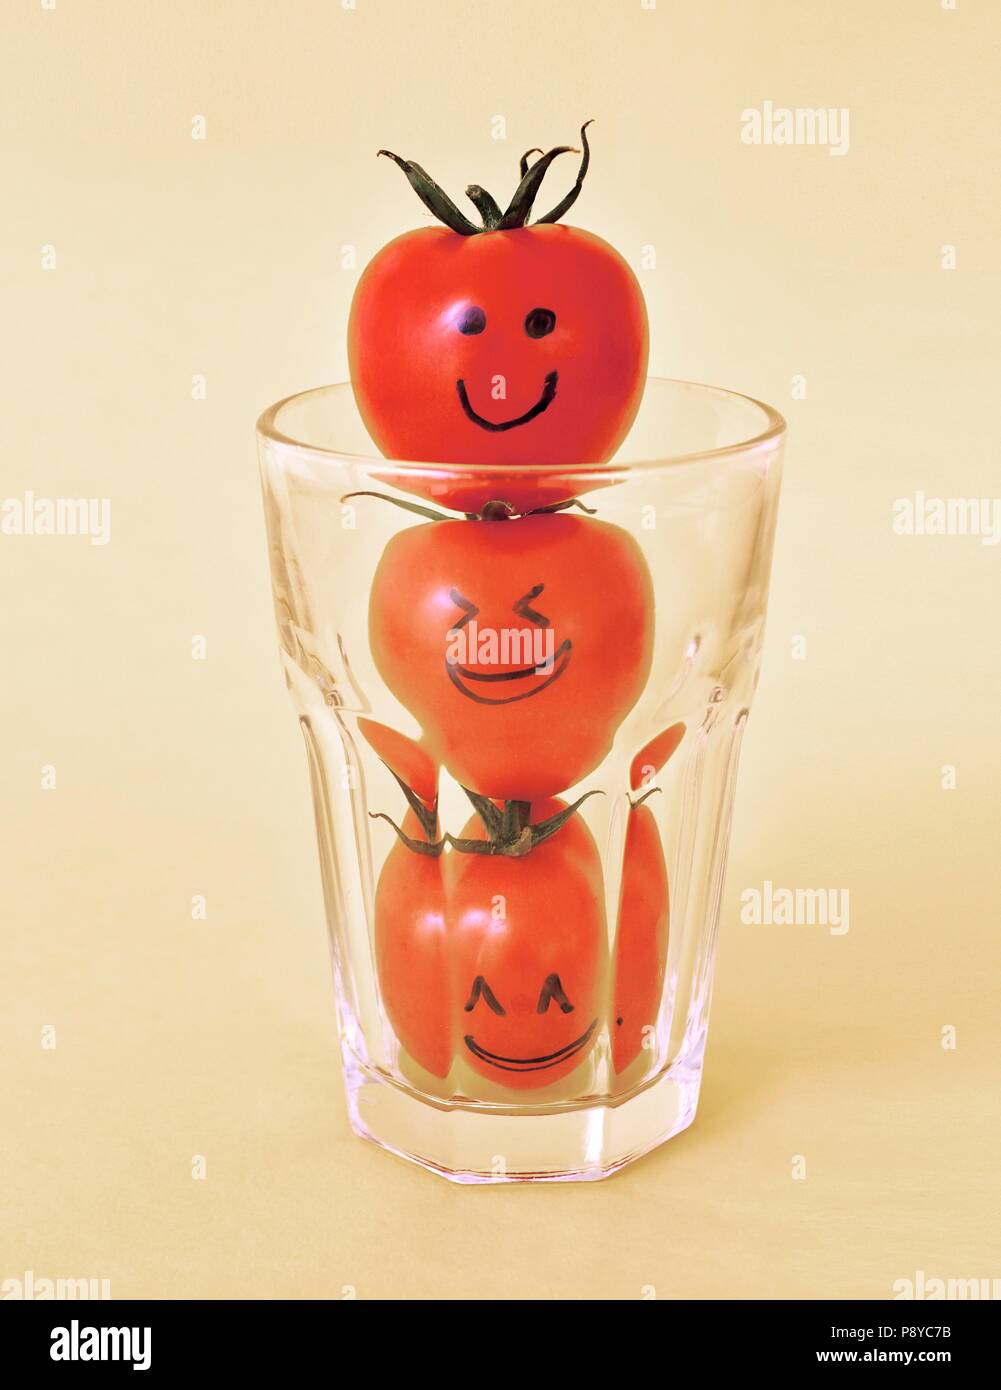 Three tomatoes with eyes and mouths drawn in black ink in a glass. Stock Photo